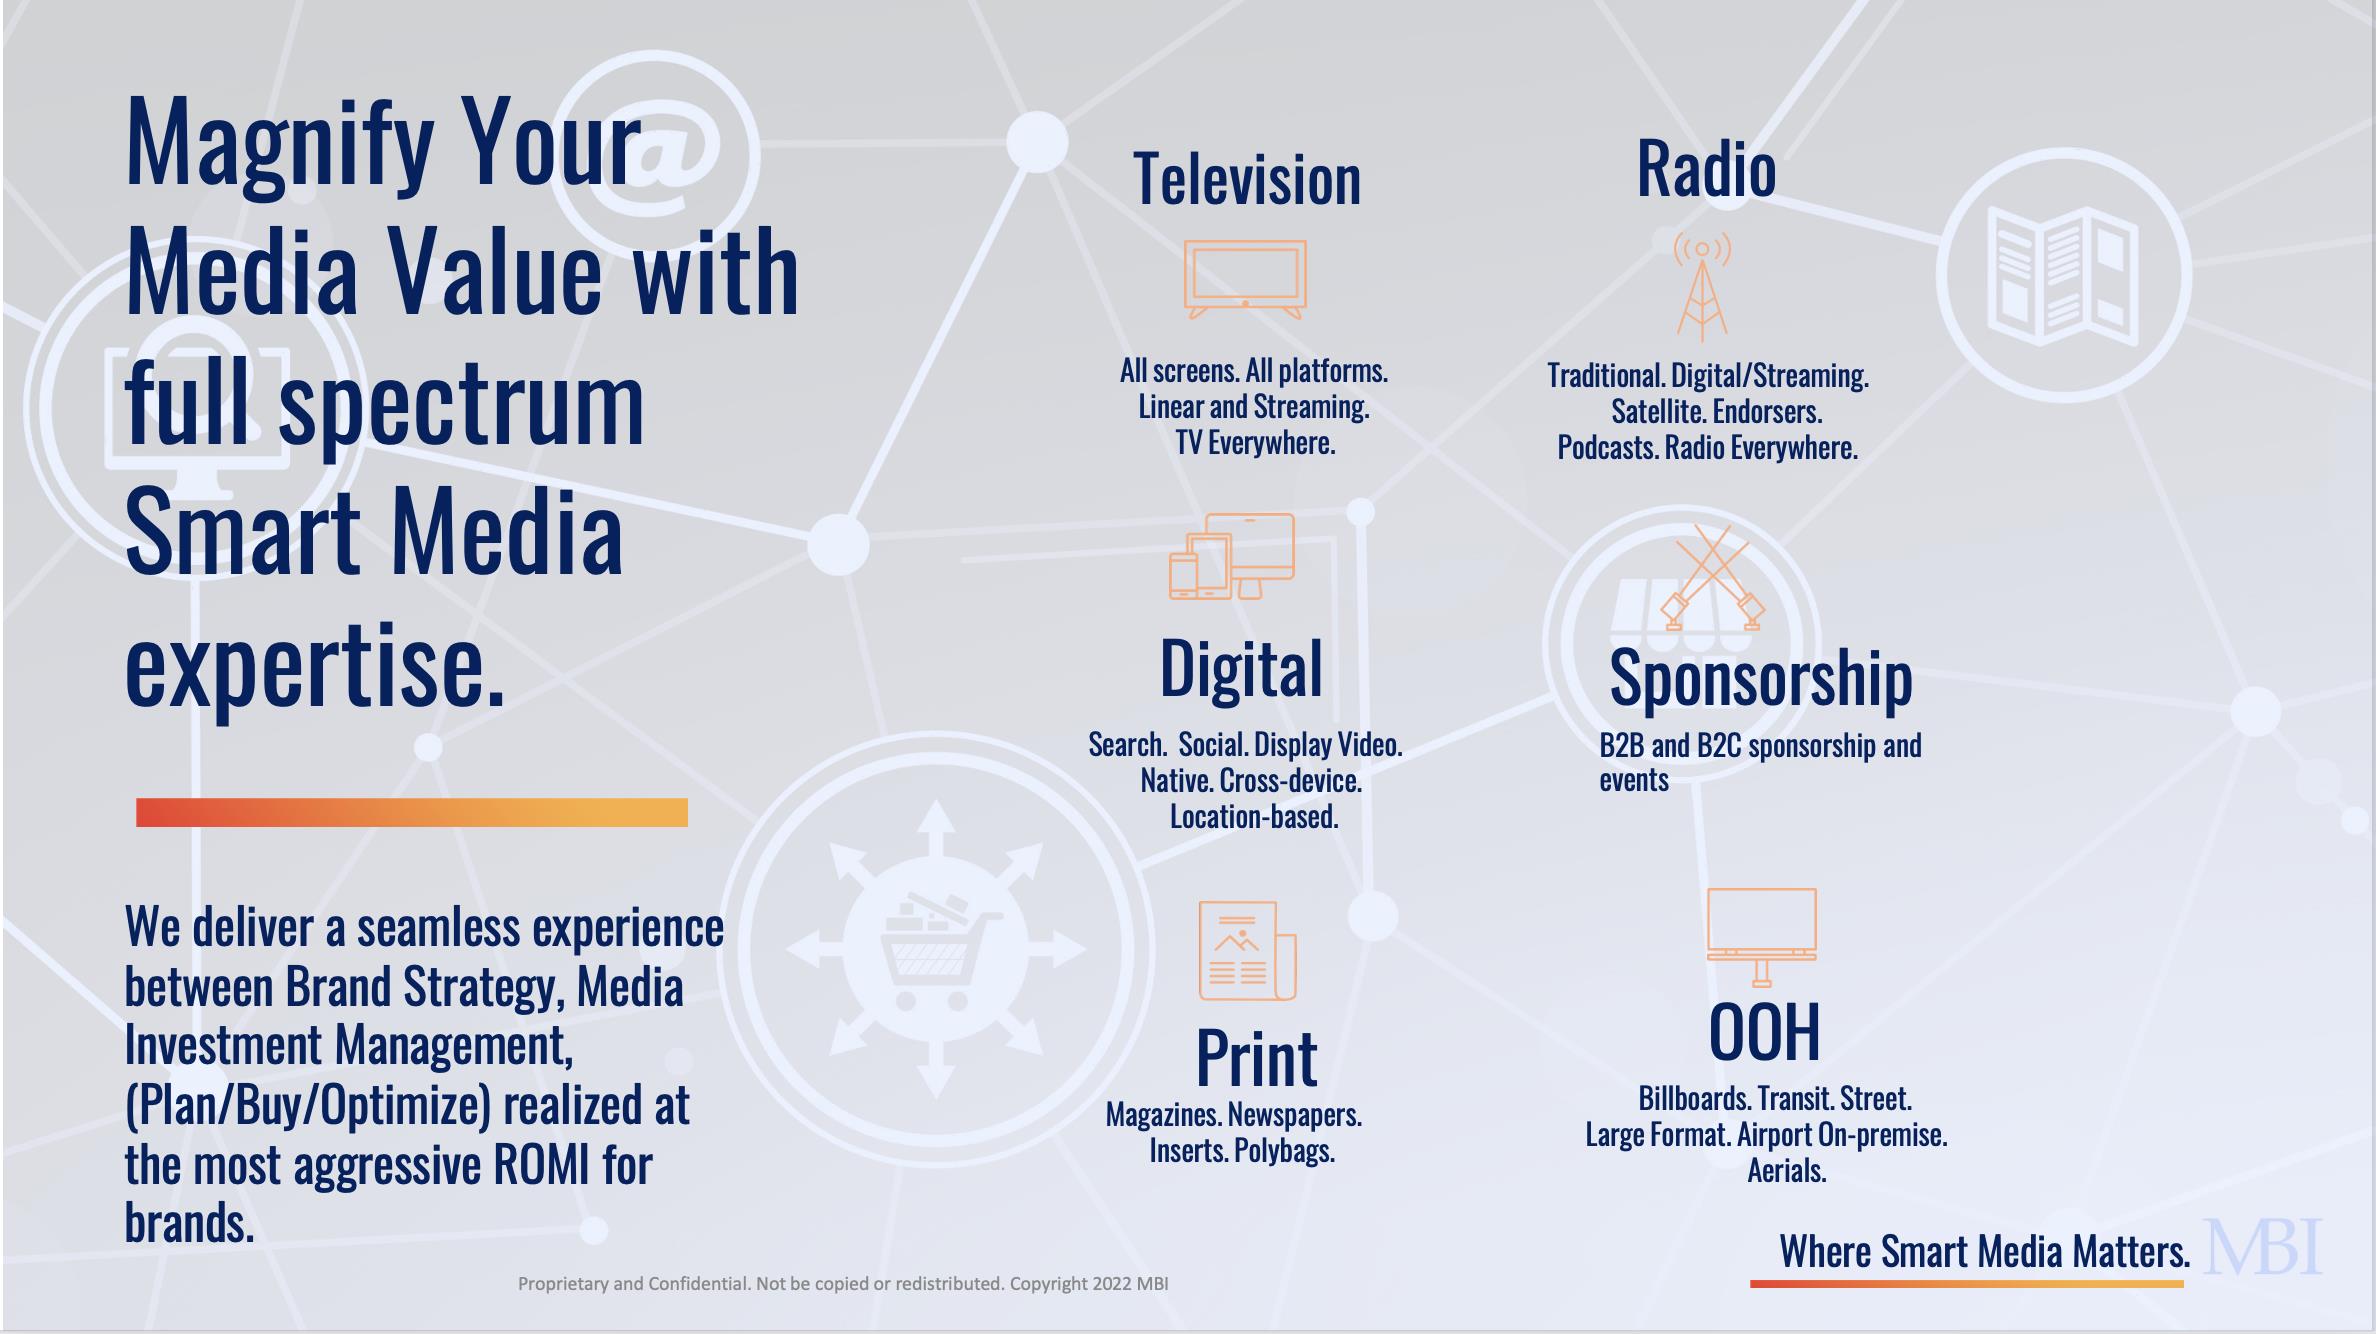 Magnify Your Media Value